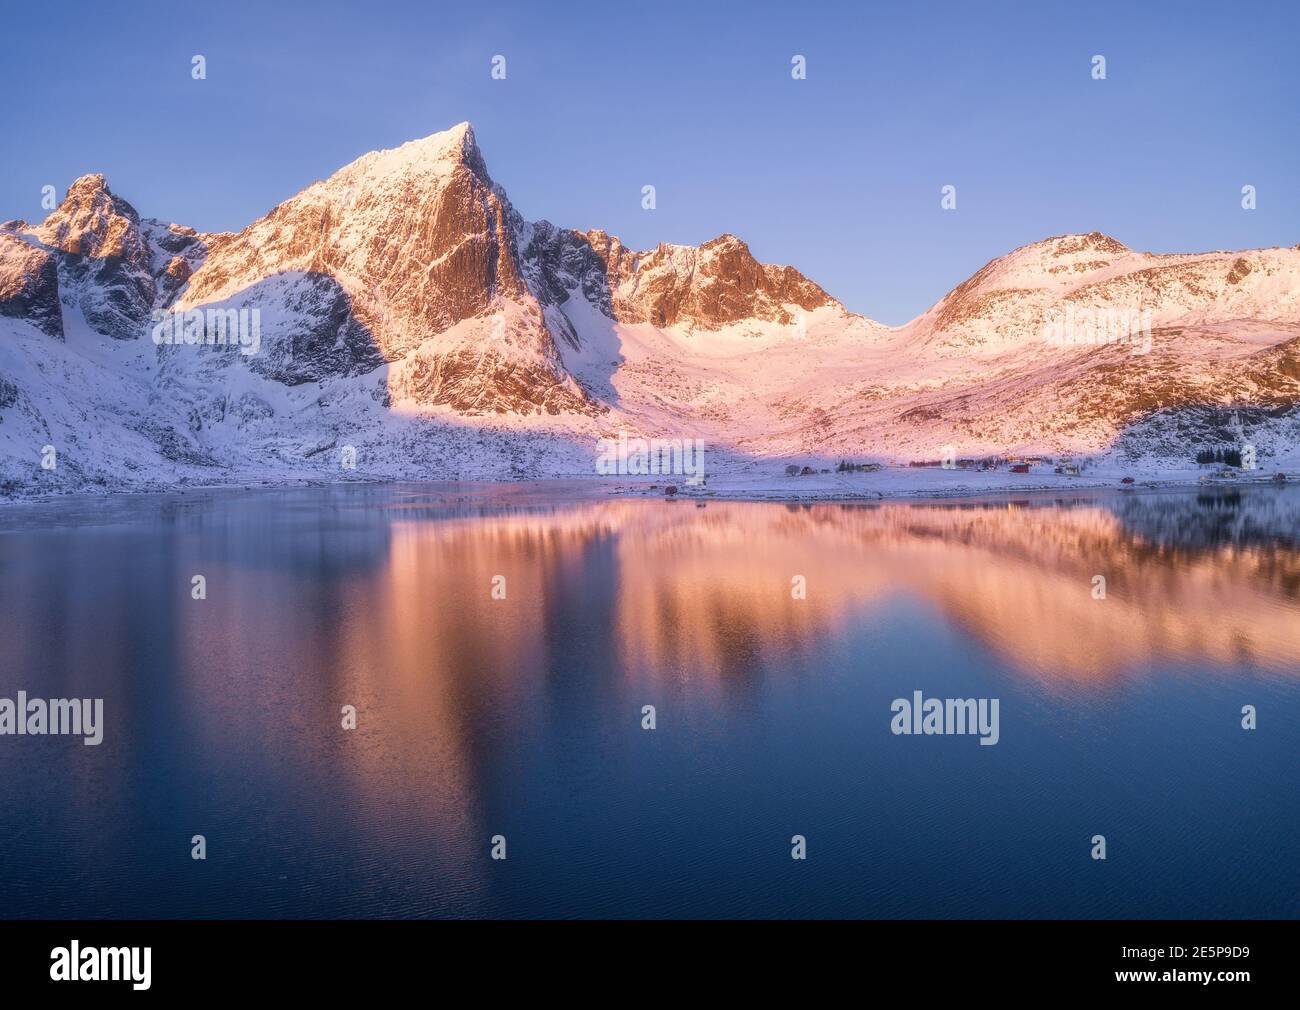 Snowy mountains and blue sky reflected in water at sunset Stock Photo